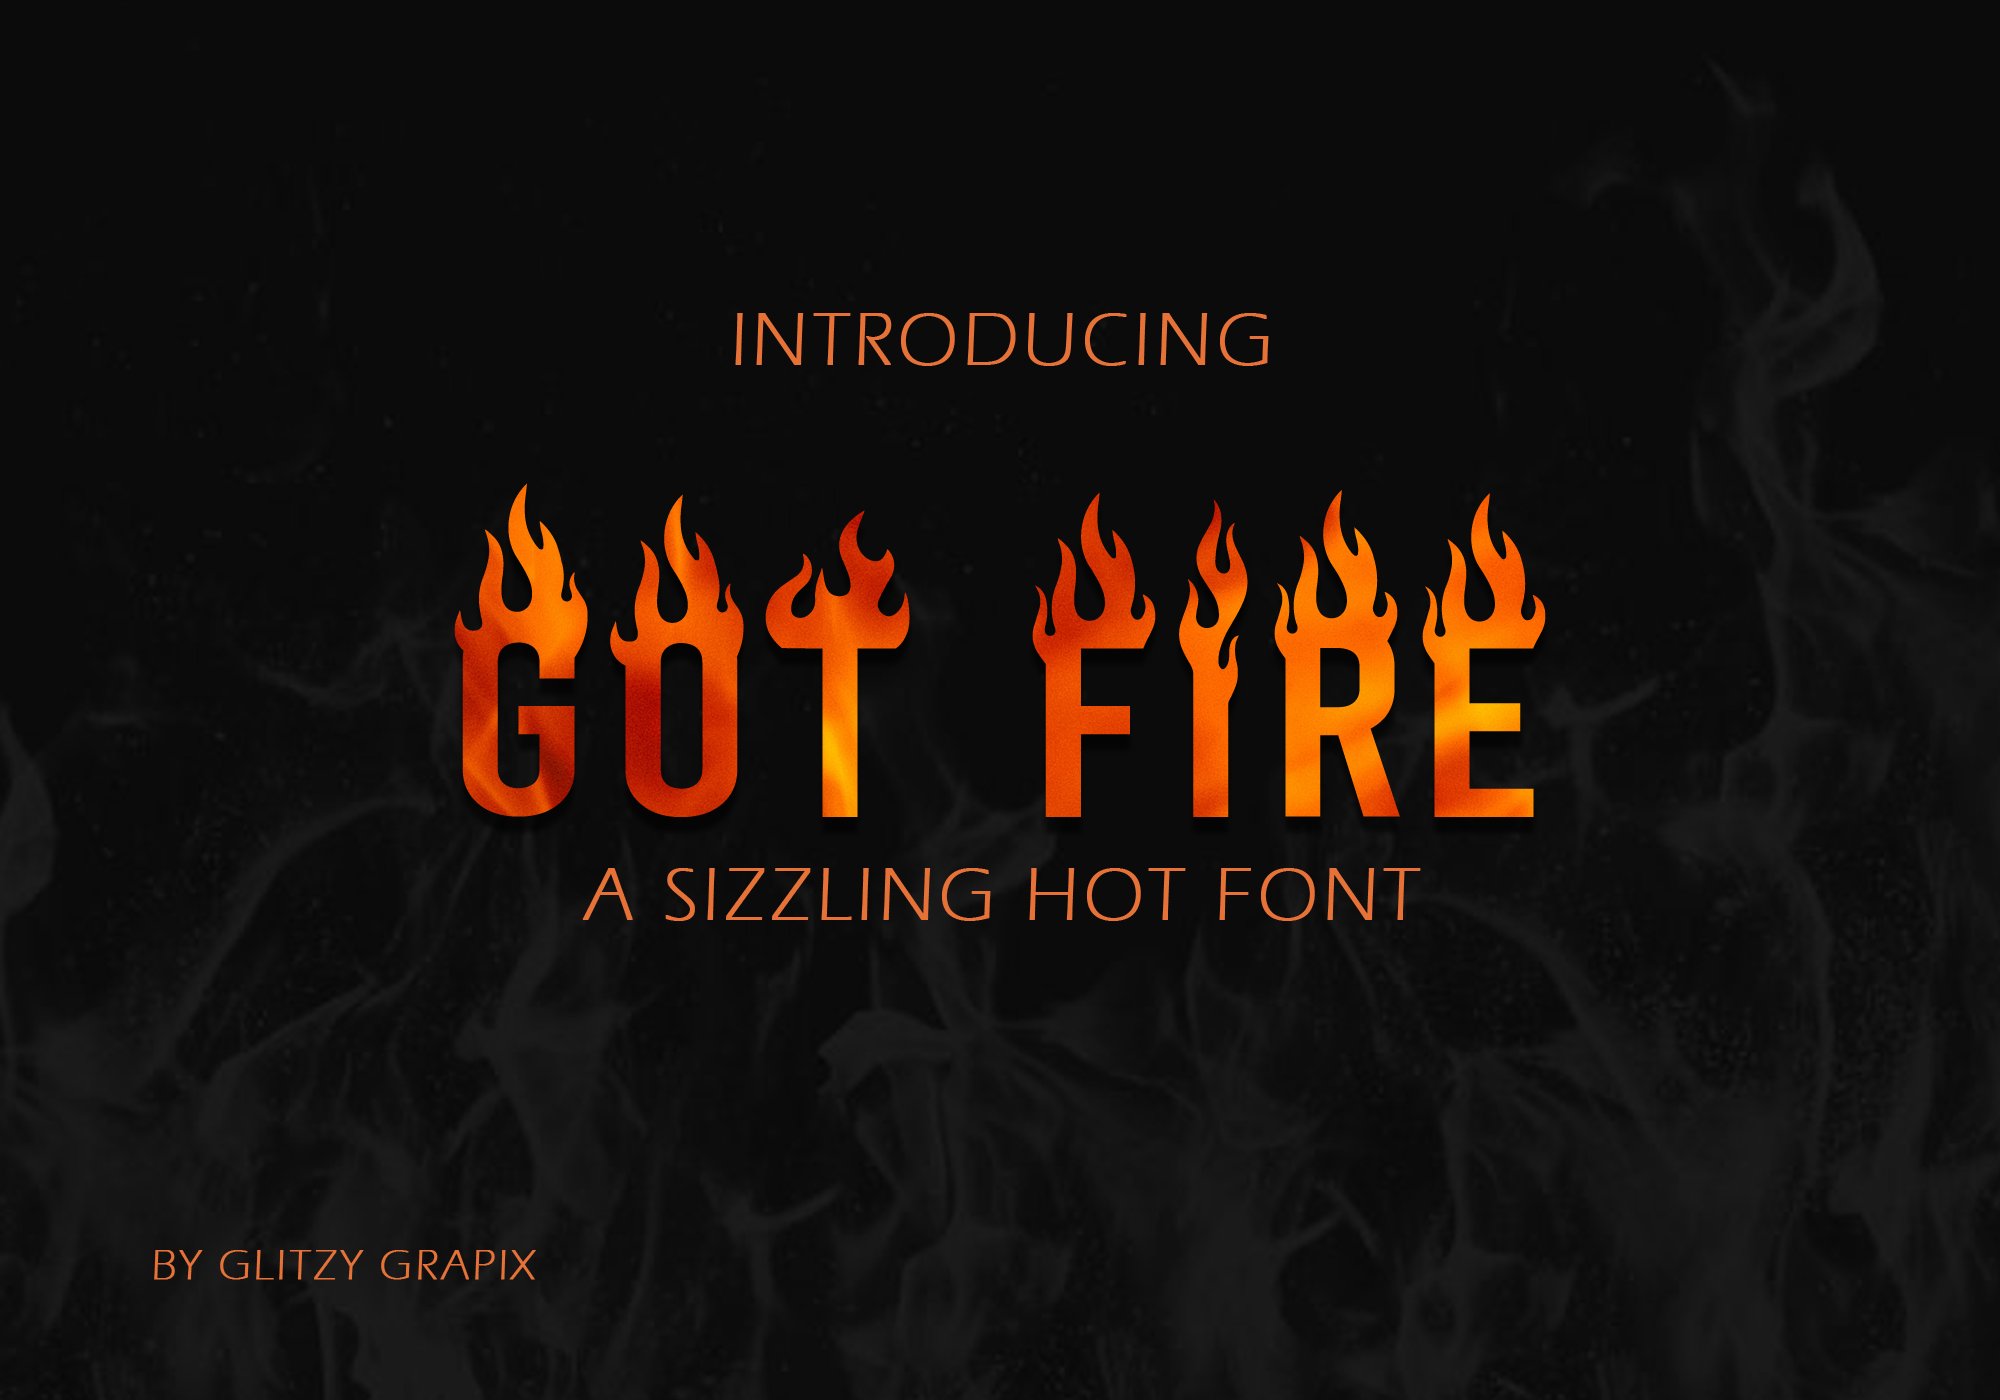 Got Fire Font – A Sizzling Hot Font cover image.